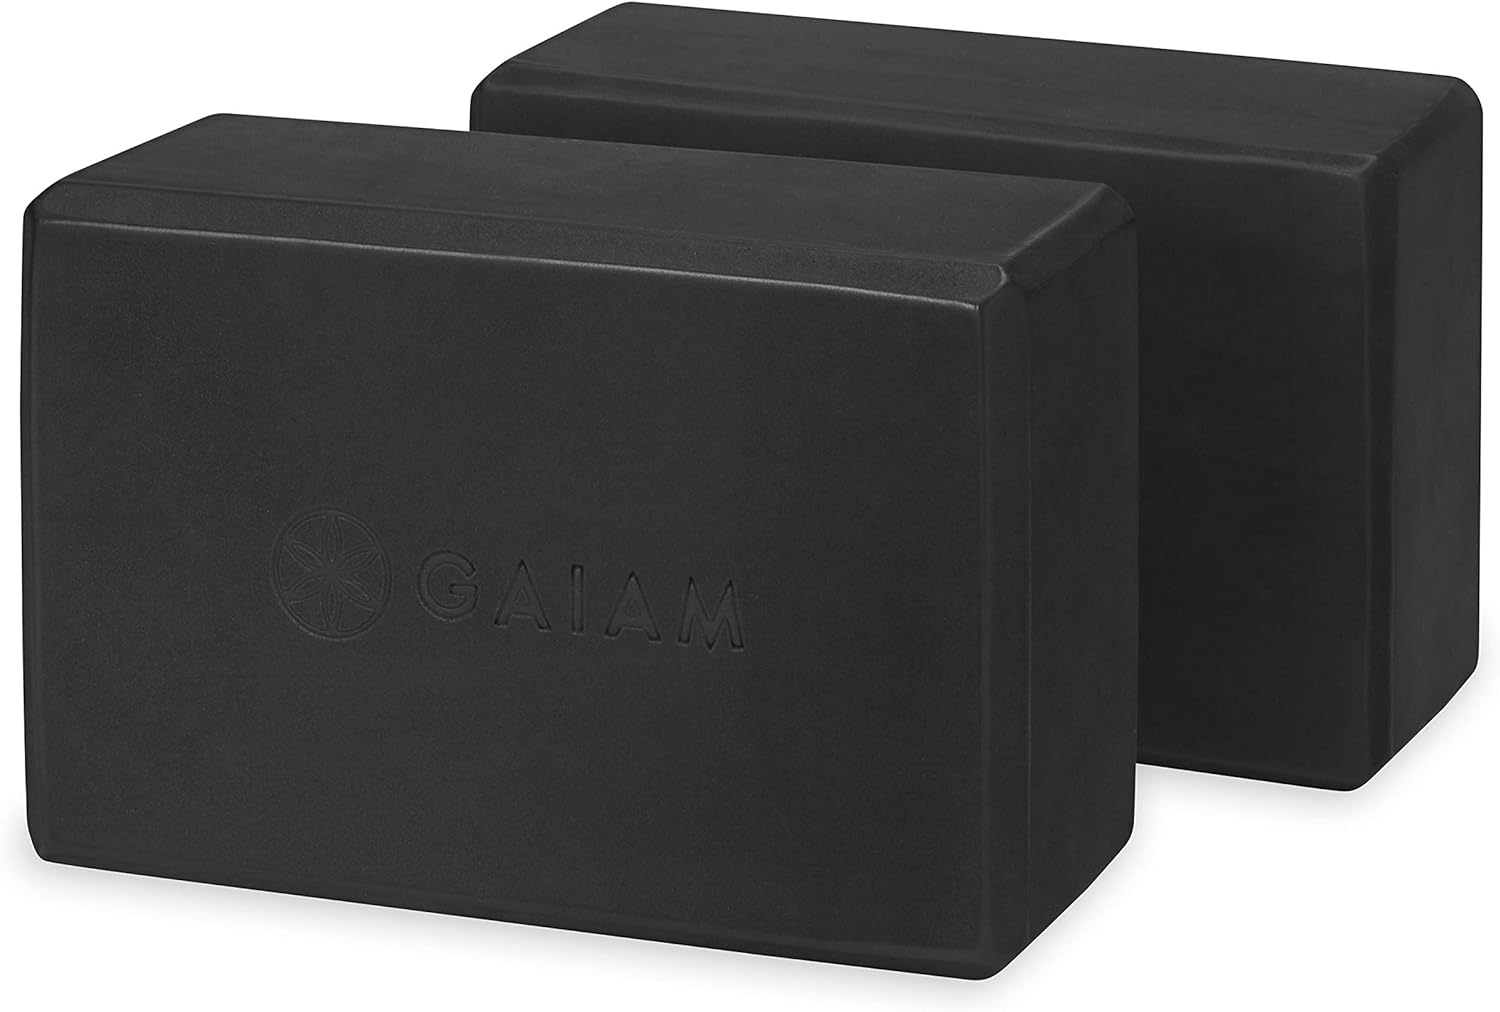 Gaiam Essentials Yoga Block (Set Of 2) – The Perfect Support for Your Yoga Practice